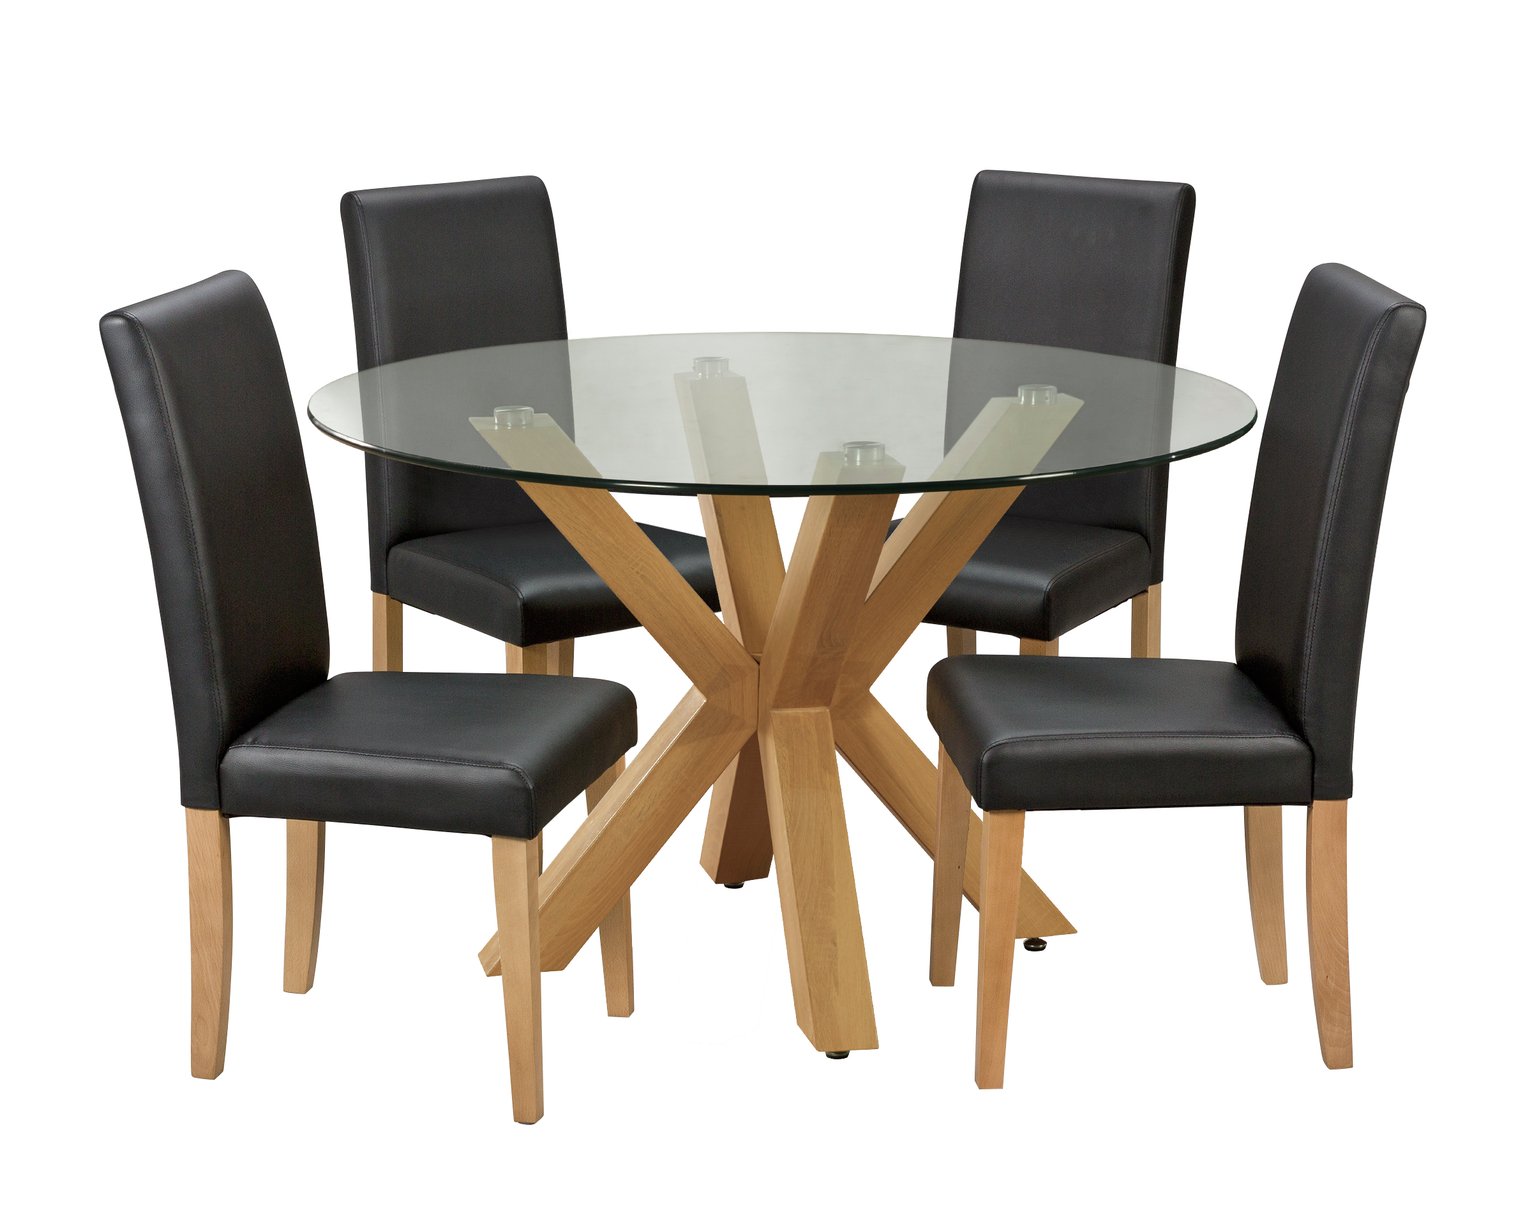 Argos Home Alden Glass Dining Table & 4 Black Chairs